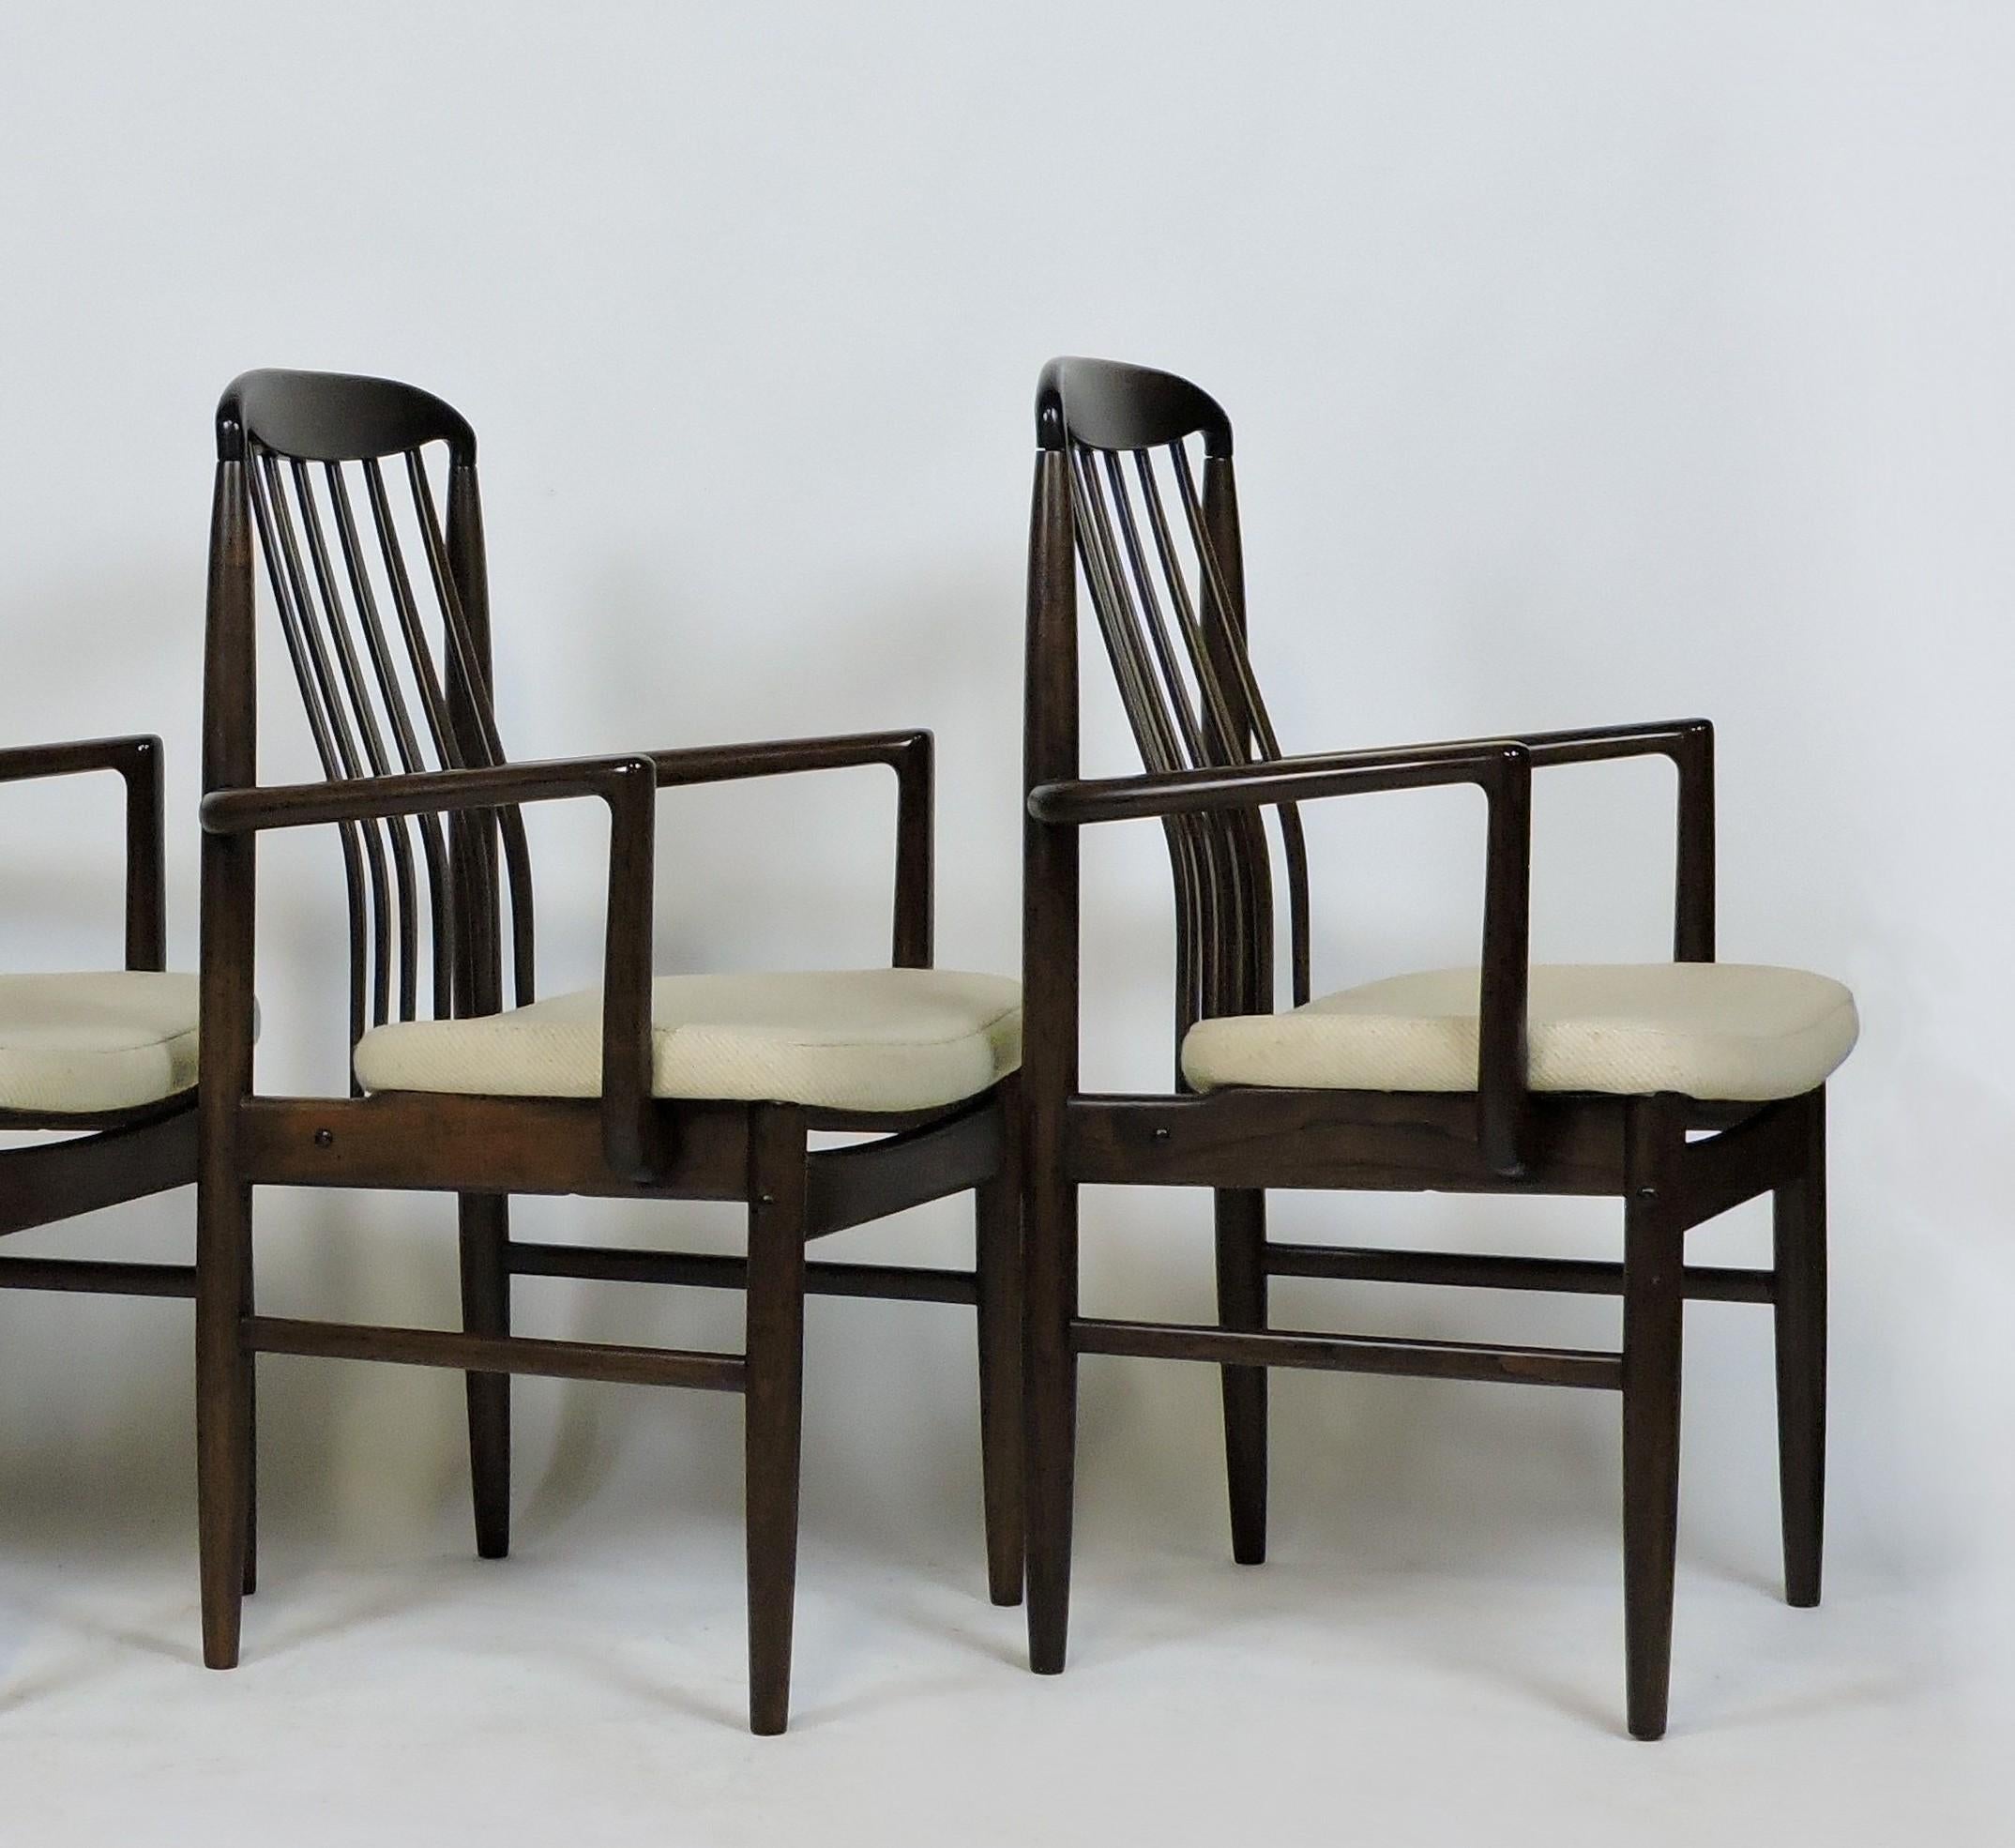 Two Midcentury Danish Modern Walnut Benny Linden BL10A Sanne Dining Chairs 1